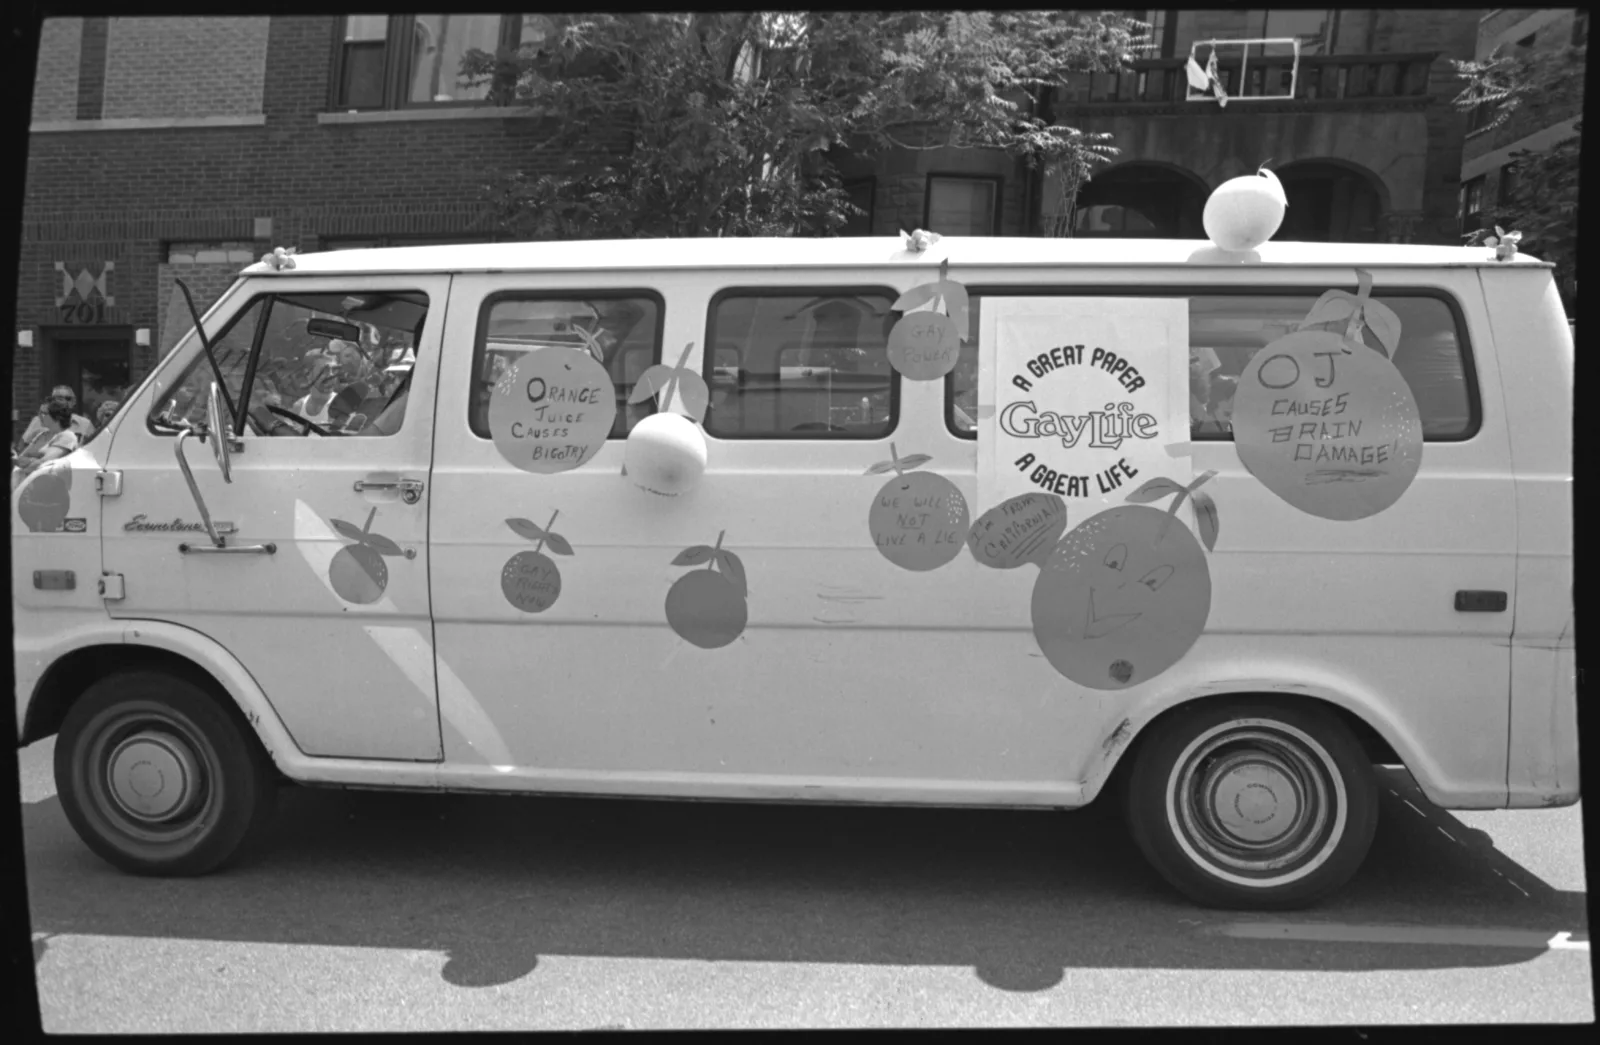 A large van decorated with oranges. A sign on the van reads "A Gay Life: A Great Paper, A Great Life."